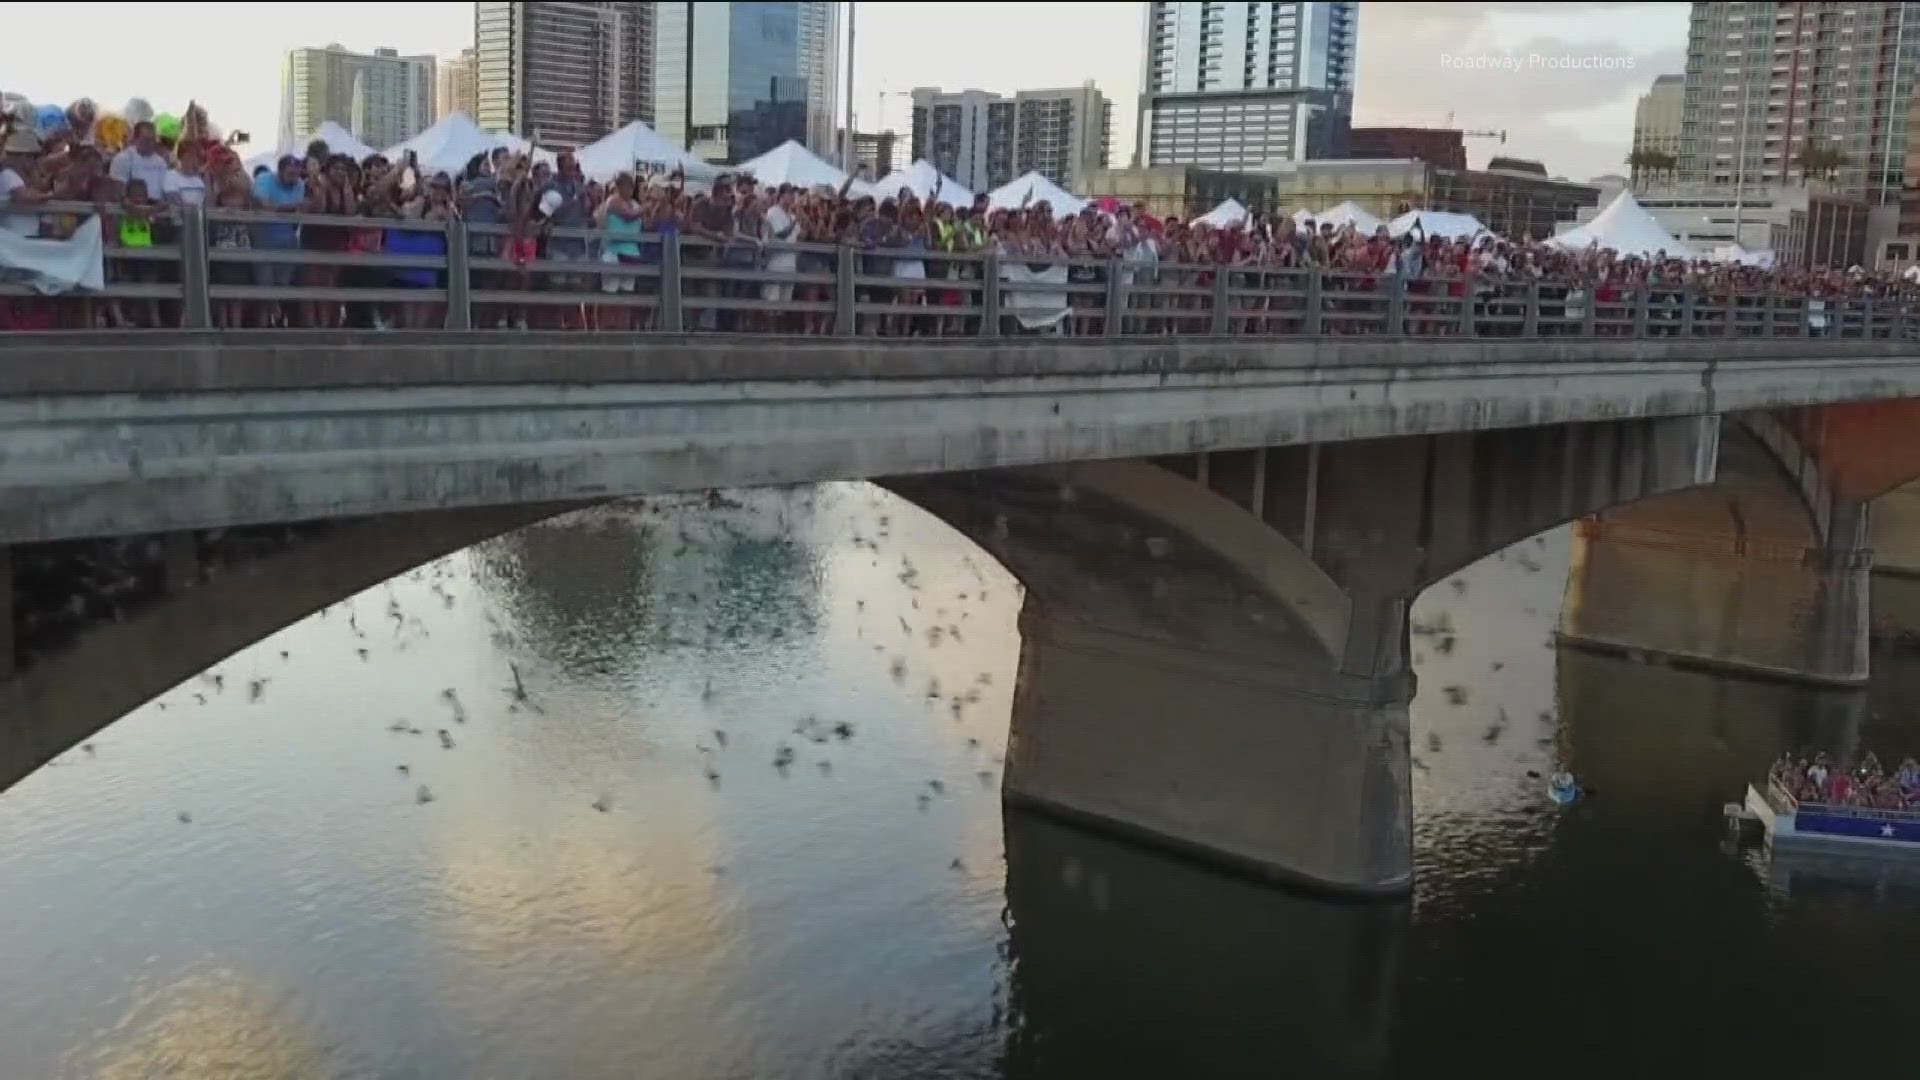 This weekend, Austin's Bat Fest returns. The Congress Avenue Bridge will be blocked off throughout the day as thousands of people come to see the bats.